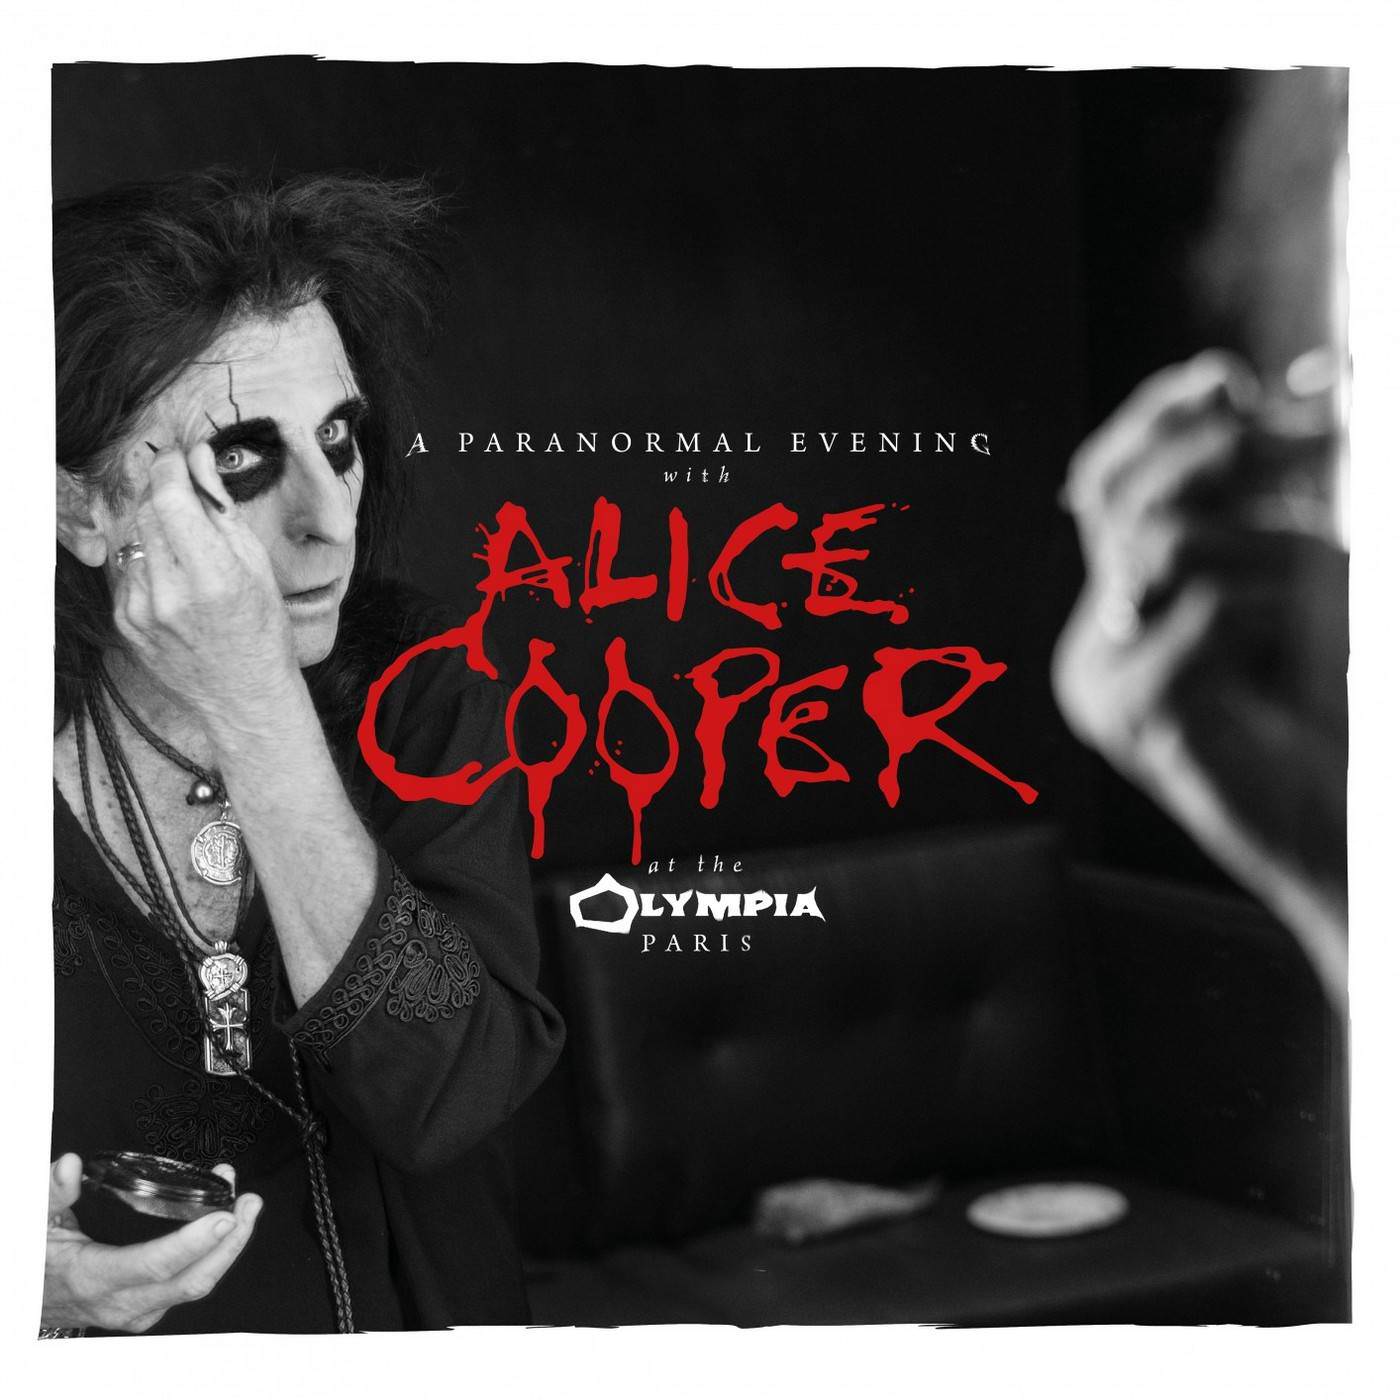 Alice Cooper – A Paranormal Evening at the Olympia Paris (2018) [FLAC 24bit/48kHz]